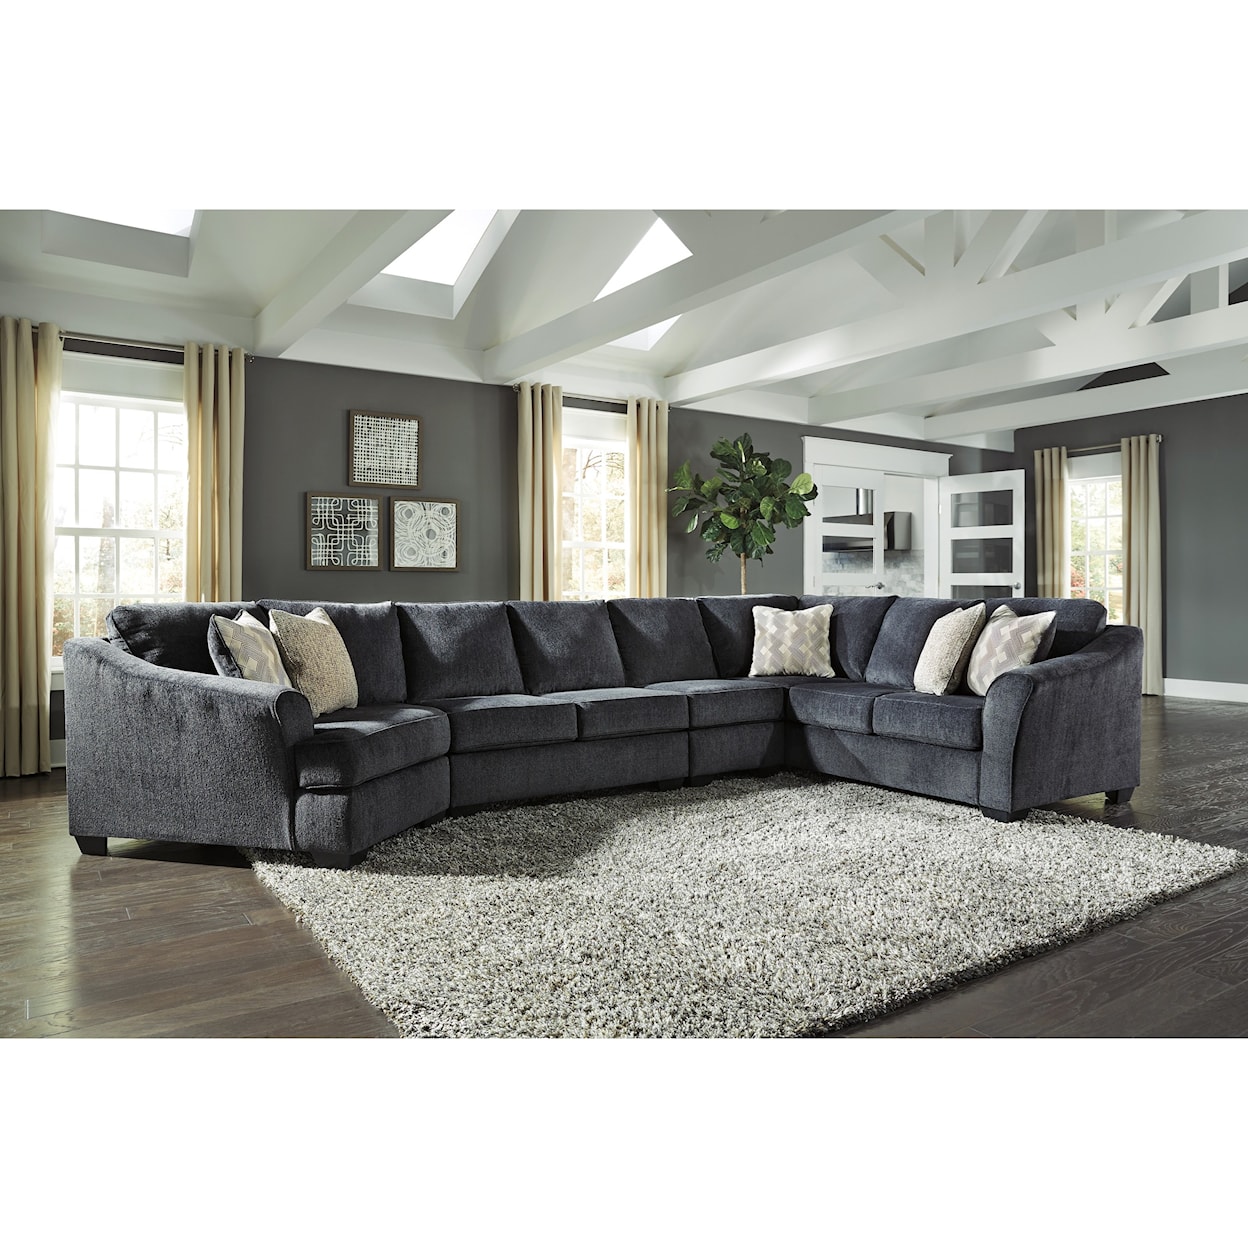 Signature Design by Ashley Furniture Eltmann 3-Piece Sectional with Left Cuddler